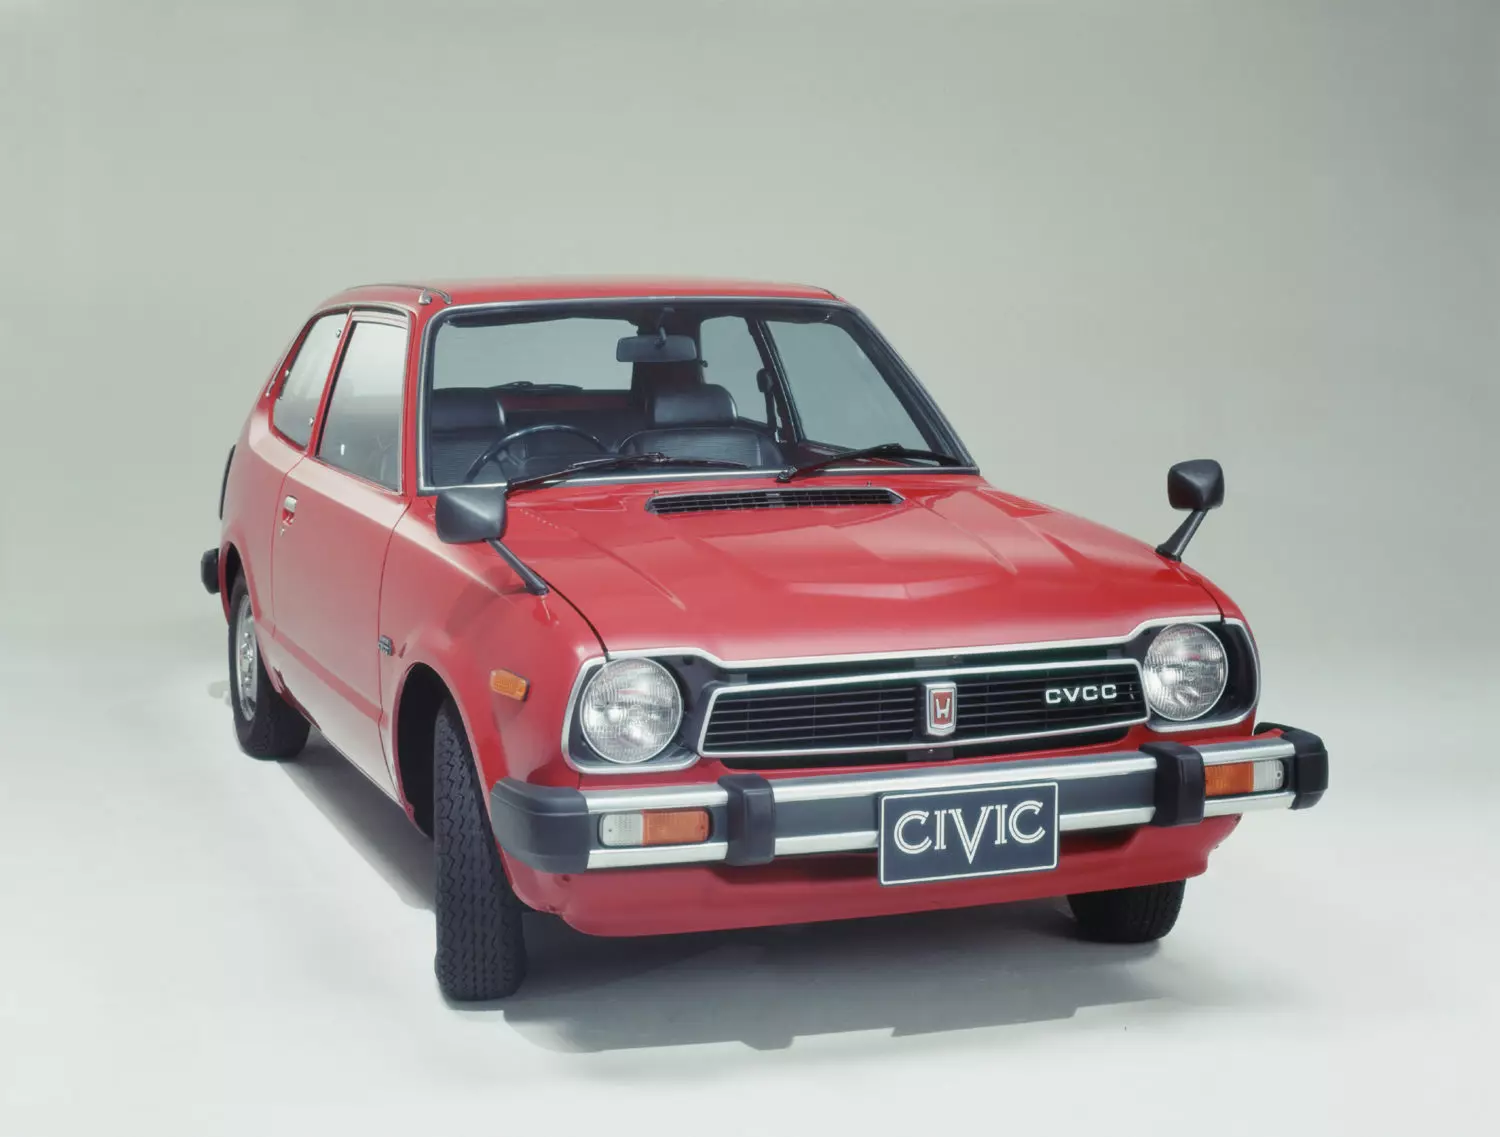 Honda Civic. The history and evolution of an icon over 10 generations